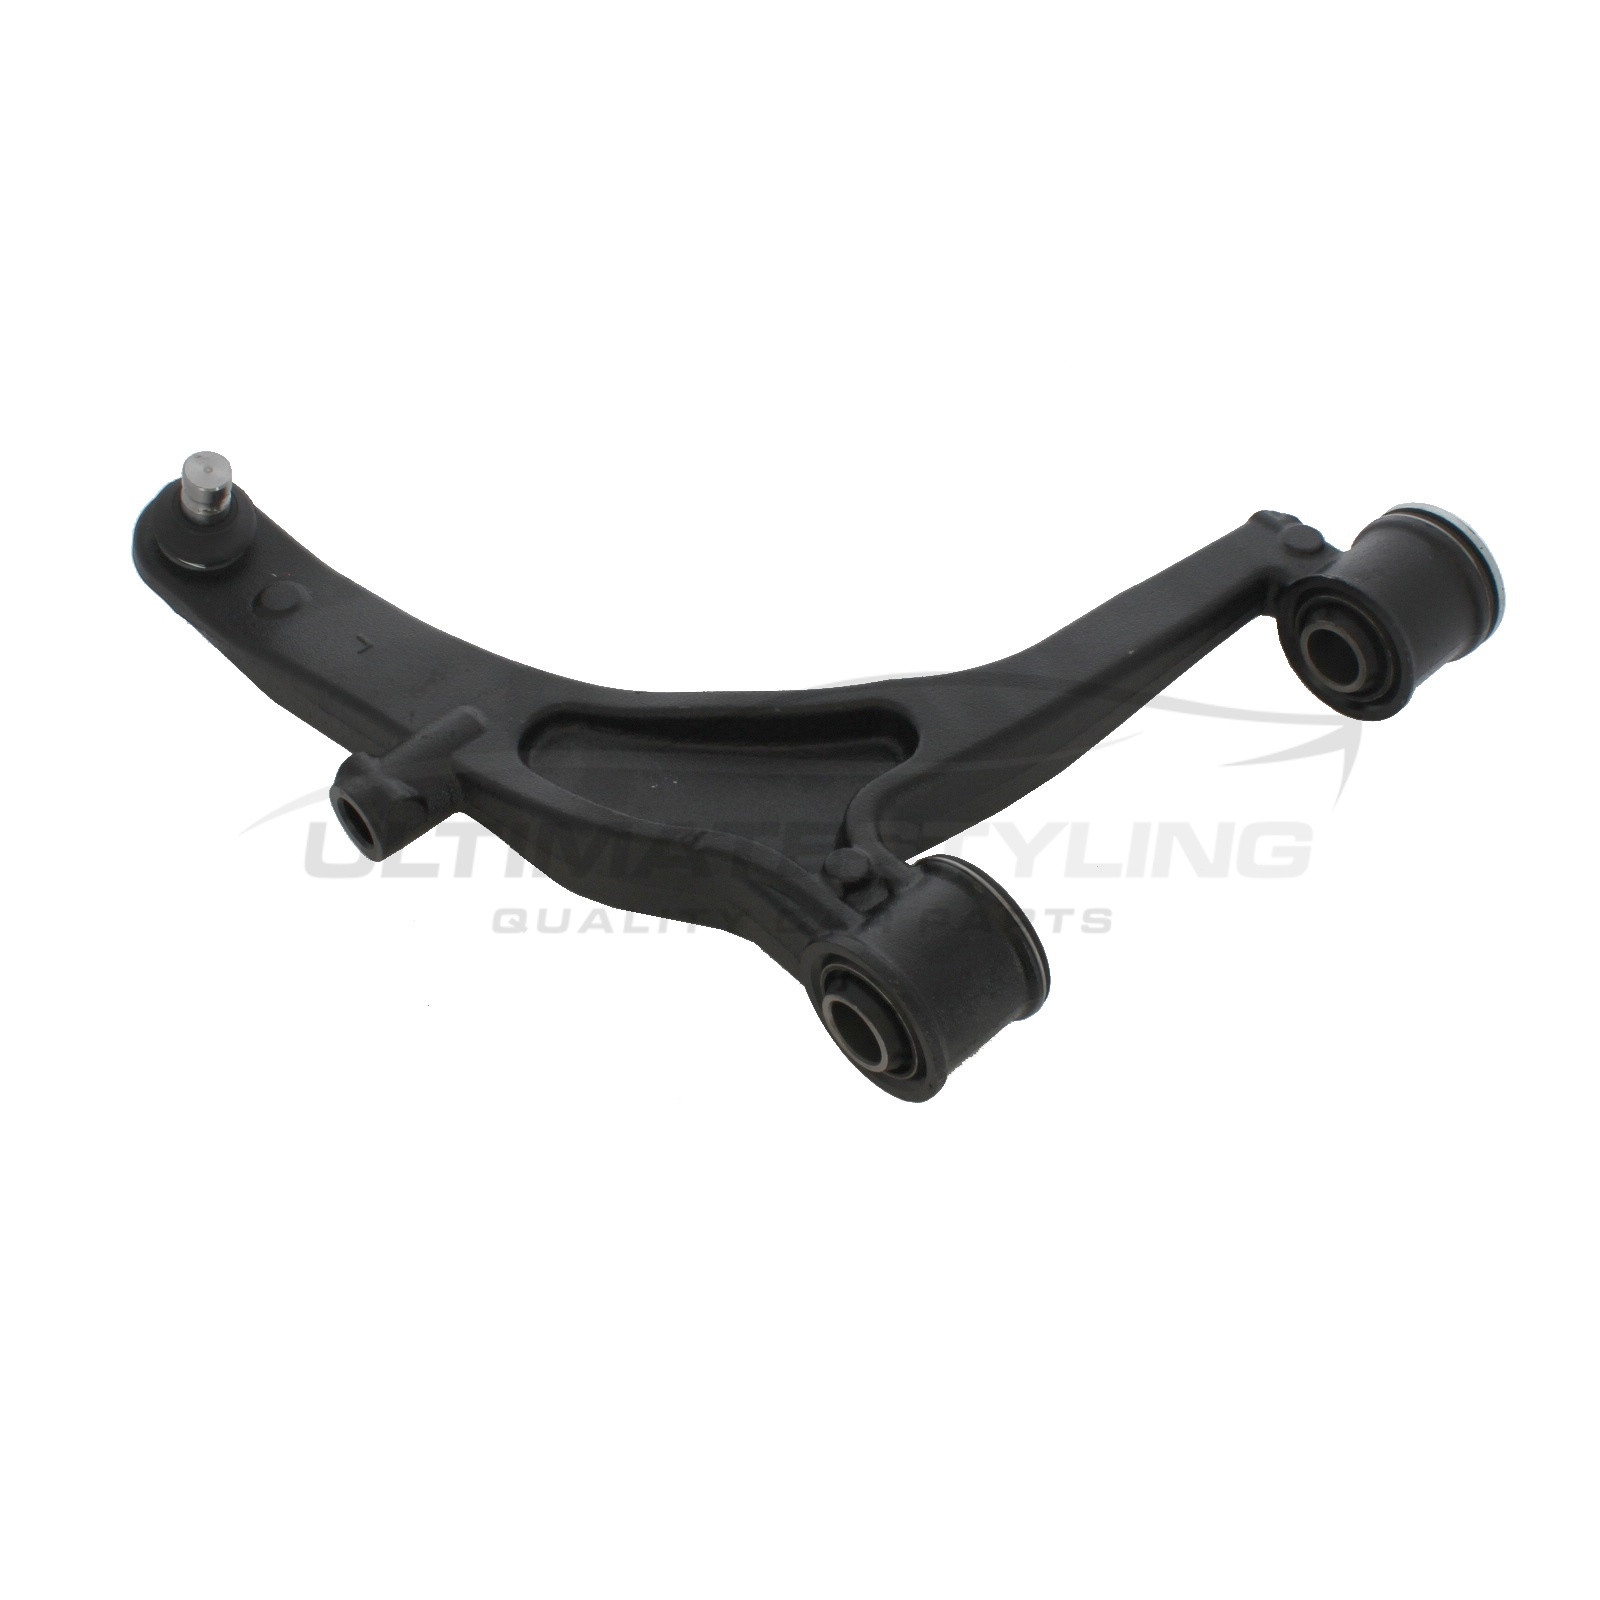 Nissan Interstar 2002-2011, Renault Master 1998-2006, Vauxhall Movano 1998-2010 Front Lower Suspension Arm (Steel) Including 22mm Ball Joint and Rear Bush Driver Side (RH)